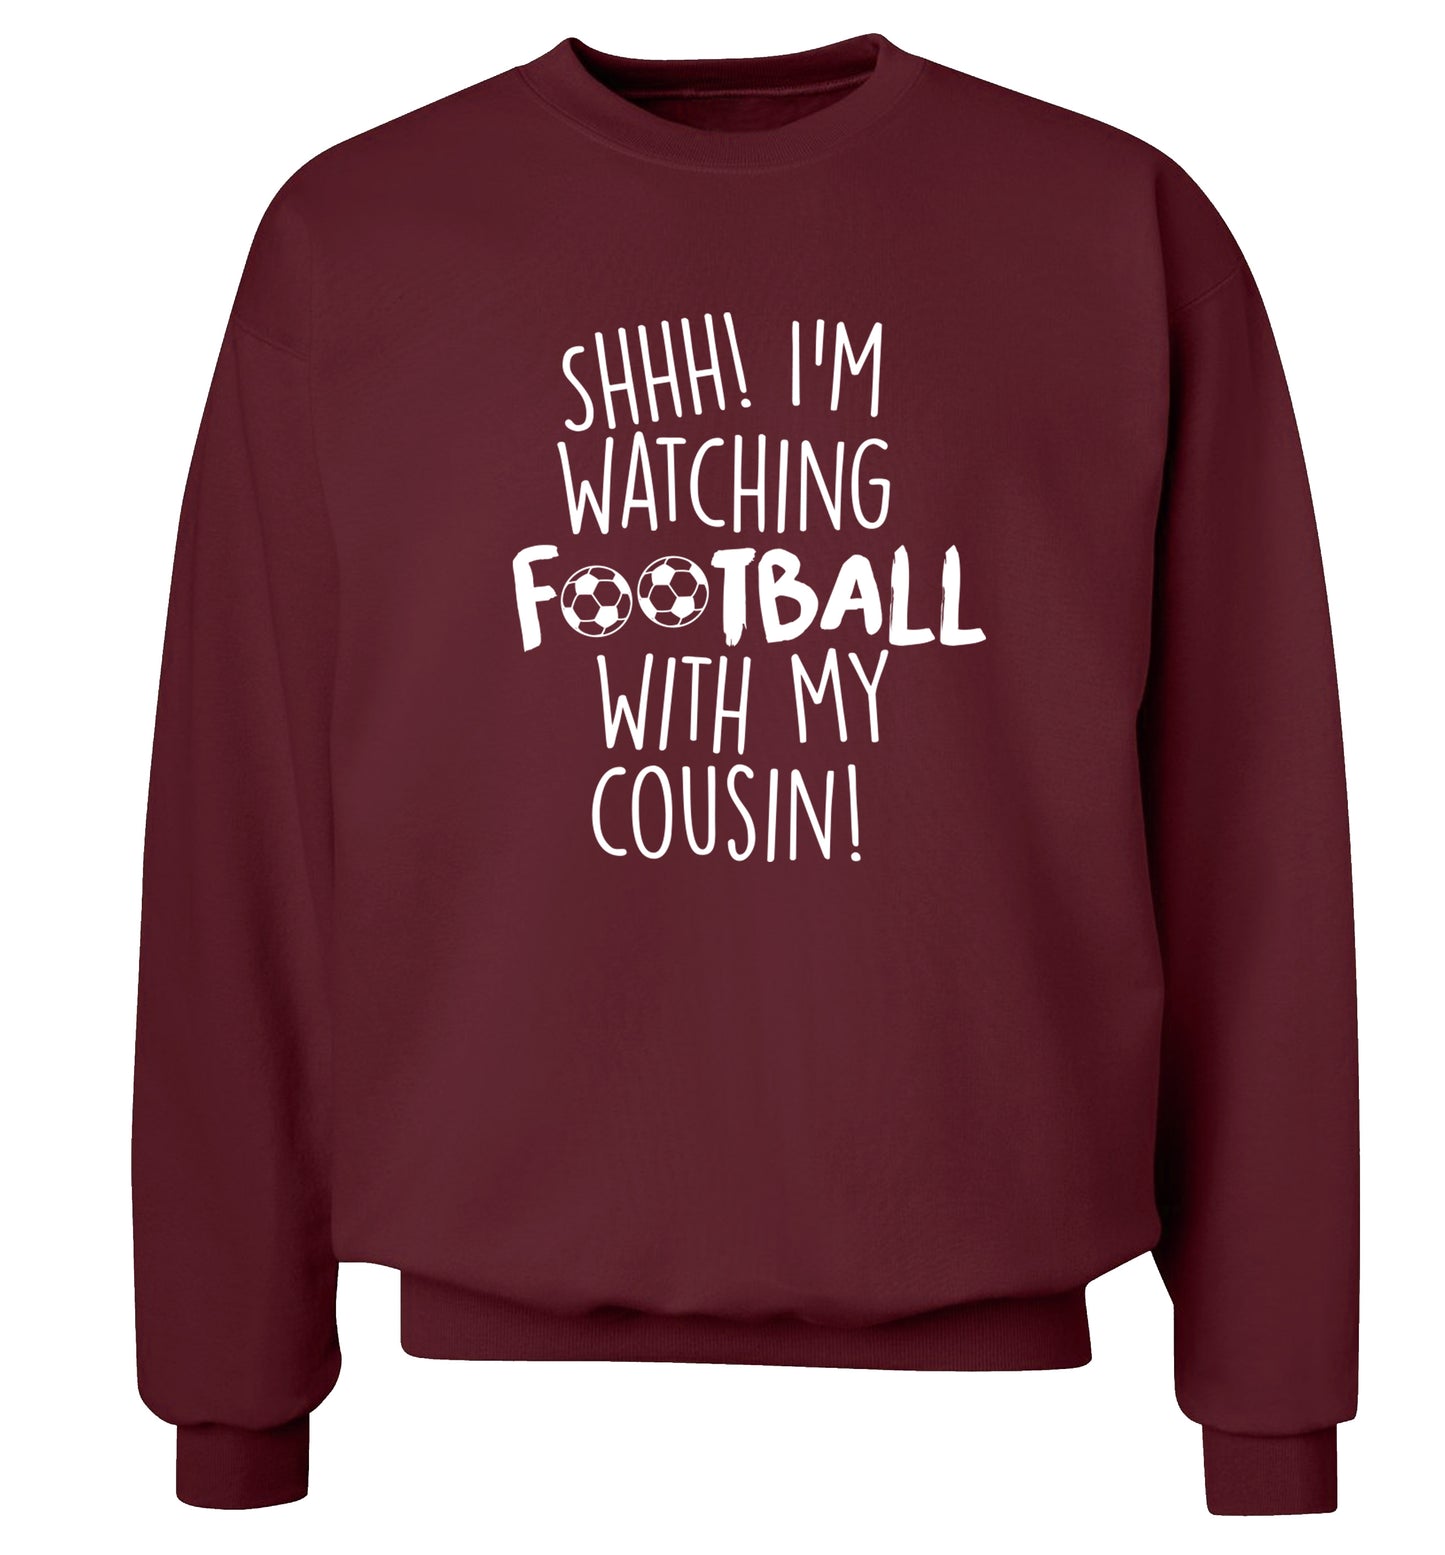 Shhh I'm watching football with my cousin Adult's unisexmaroon Sweater 2XL